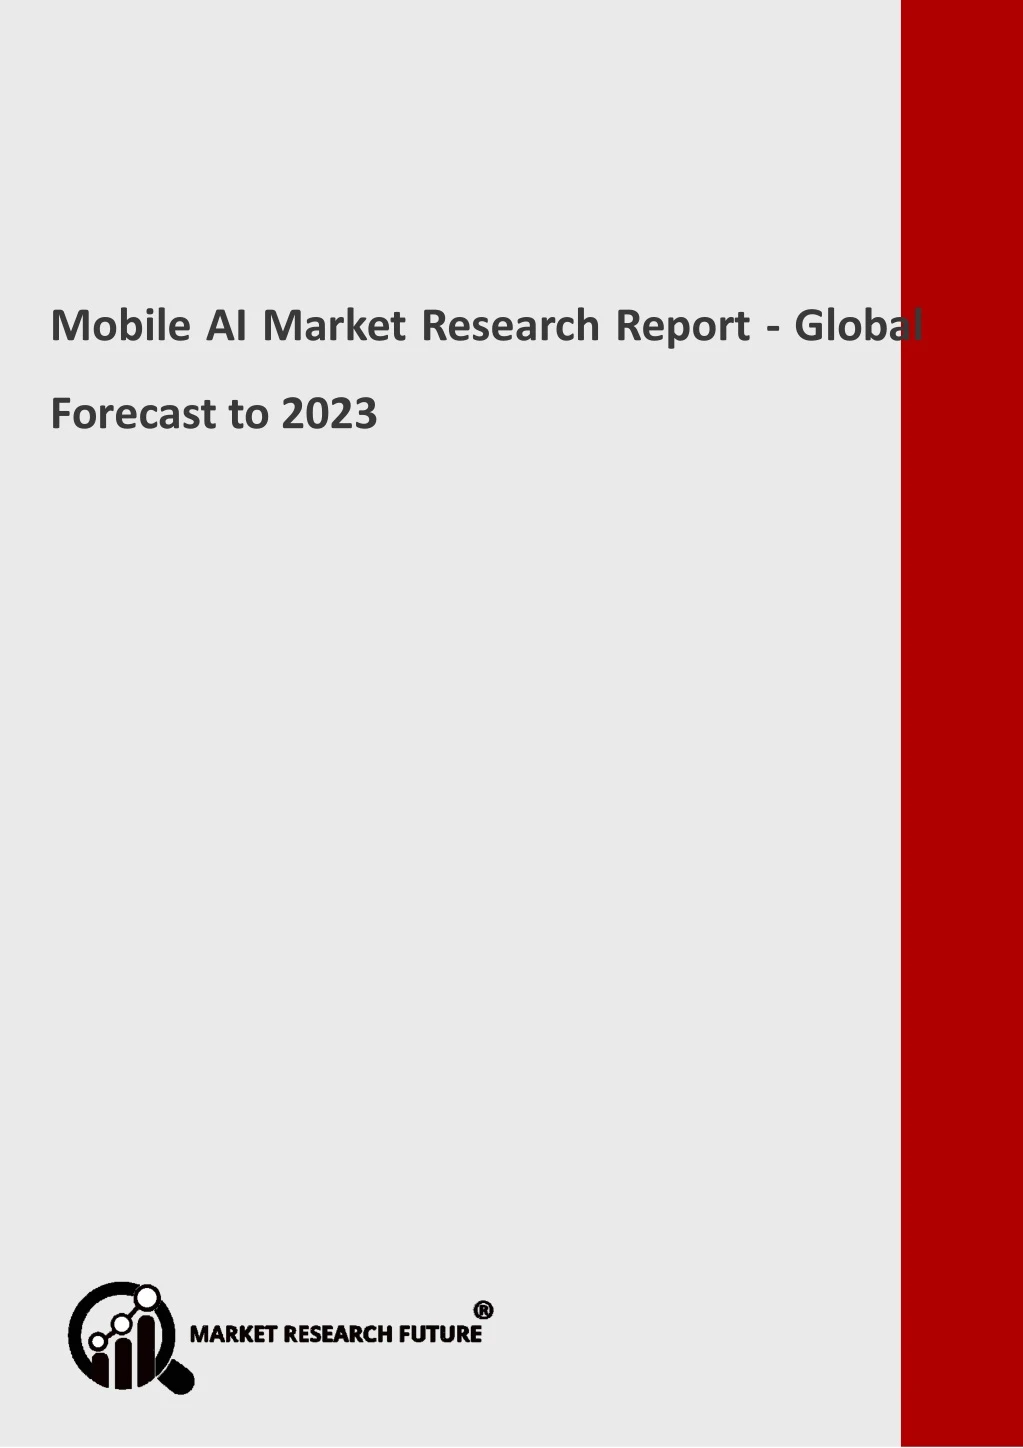 mobile ai market research report global forecast